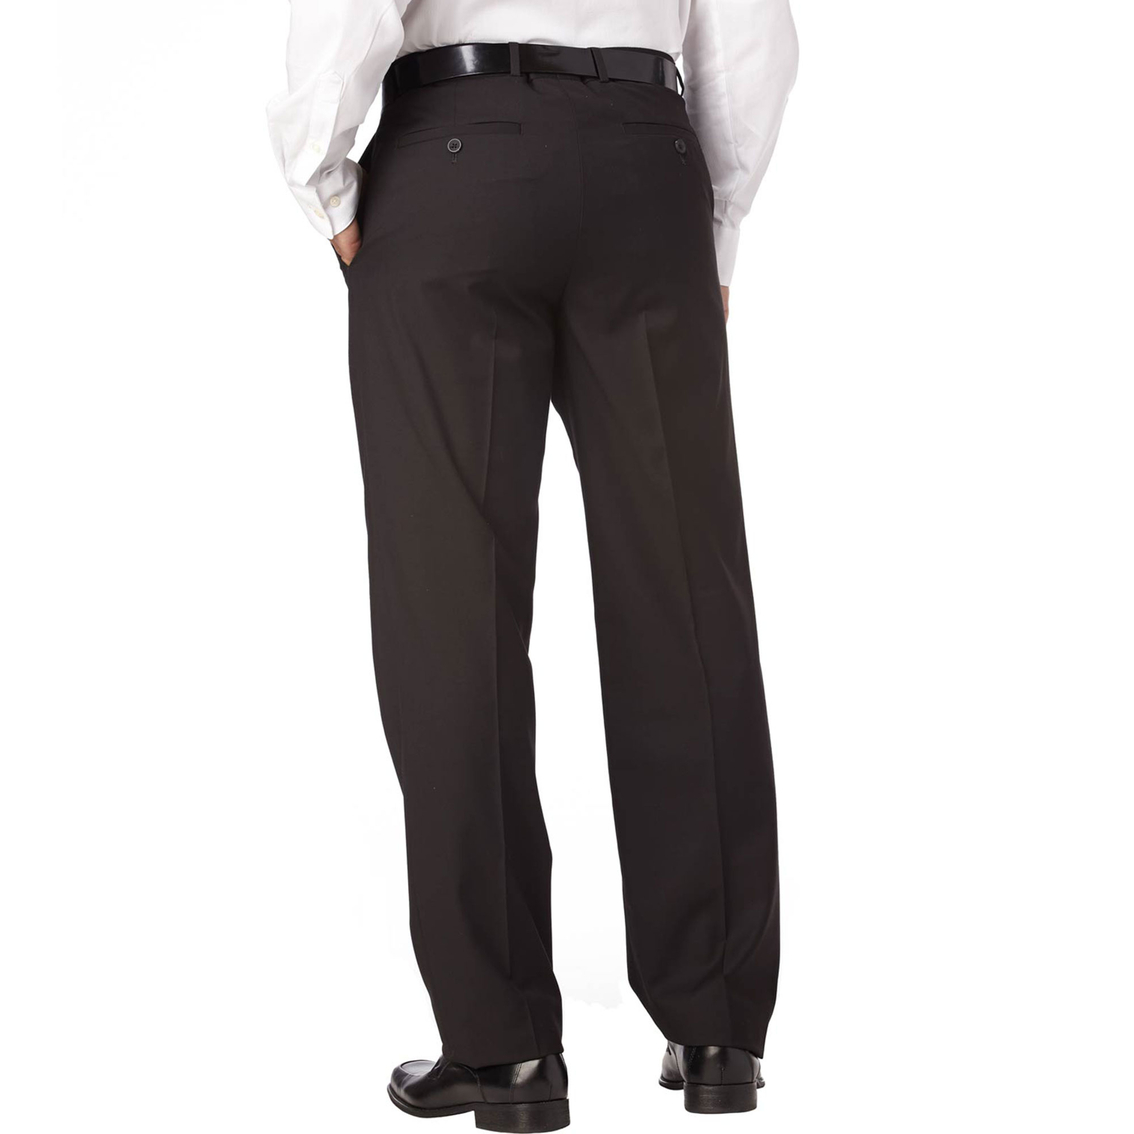 Kenneth Cole Reaction Regular Fit Suited Separate Flat Front Pants - Image 2 of 2